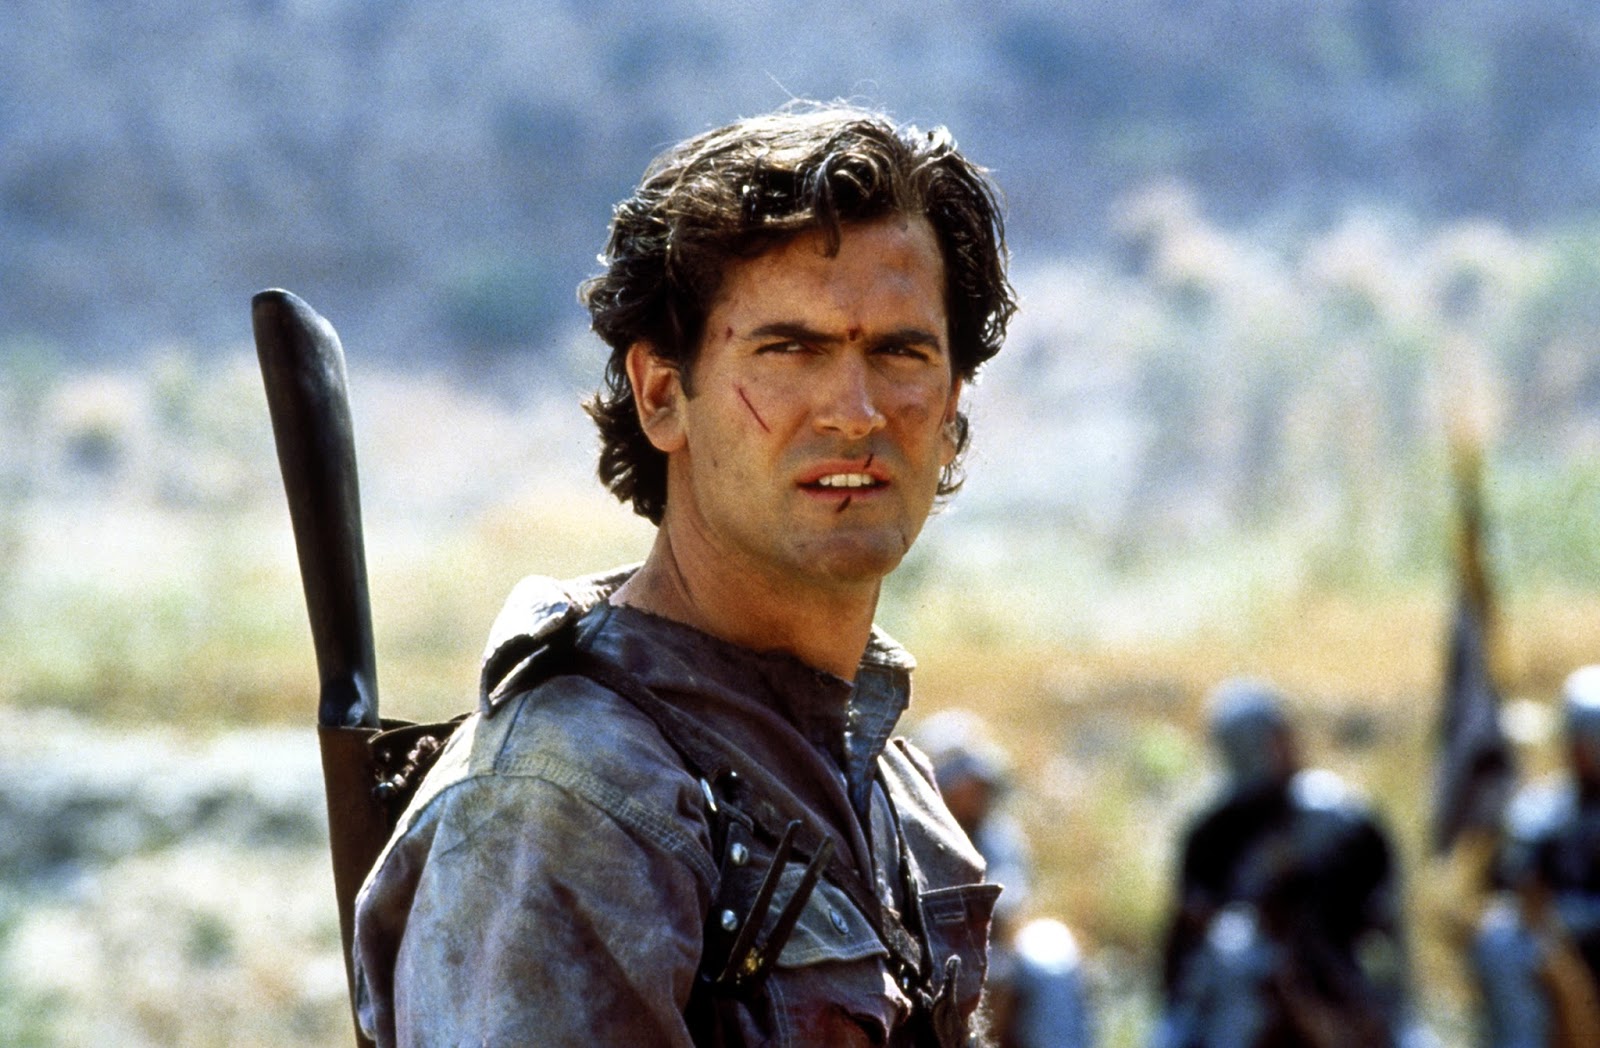 Army-of-Darkness